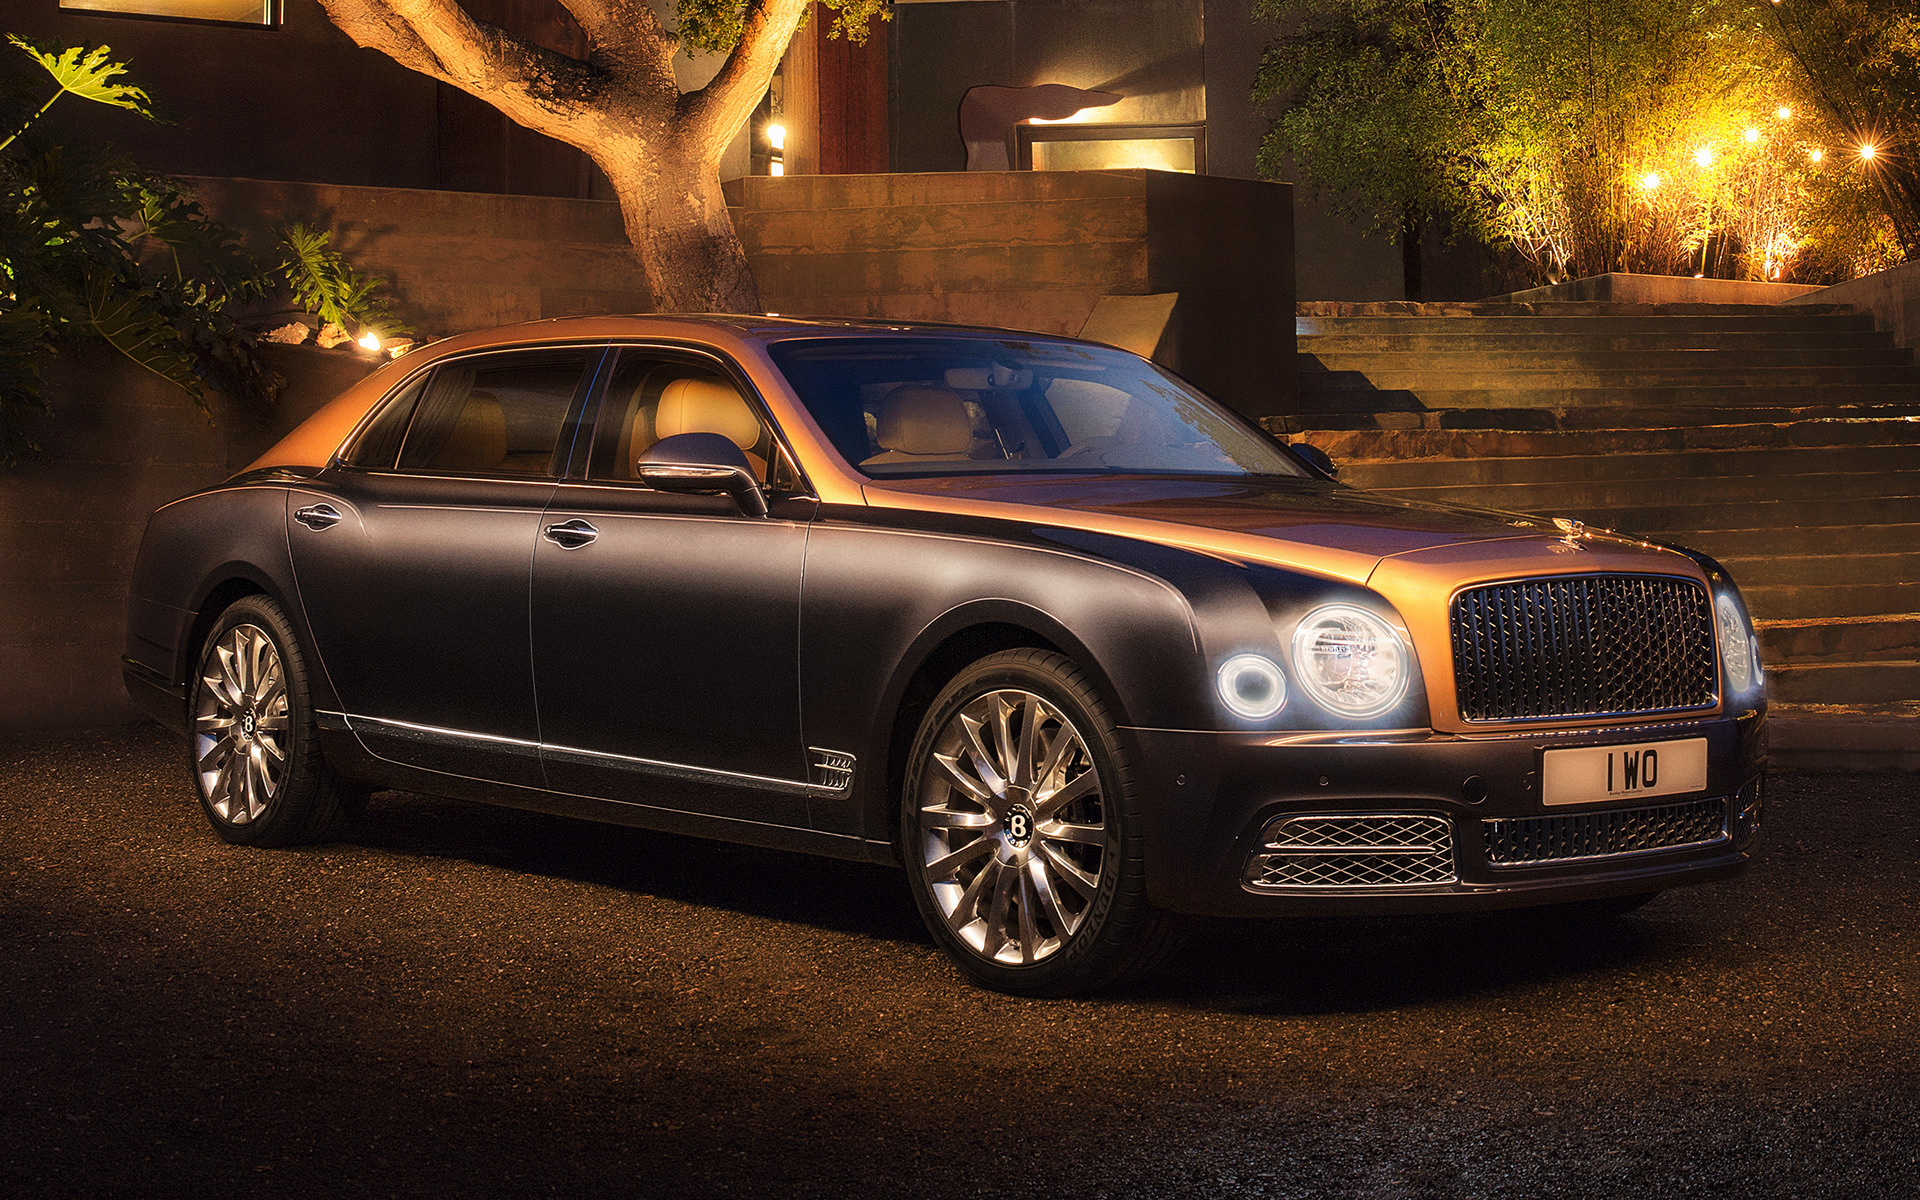 Bentley Mulsanne Extended Wheelbase and HD Image